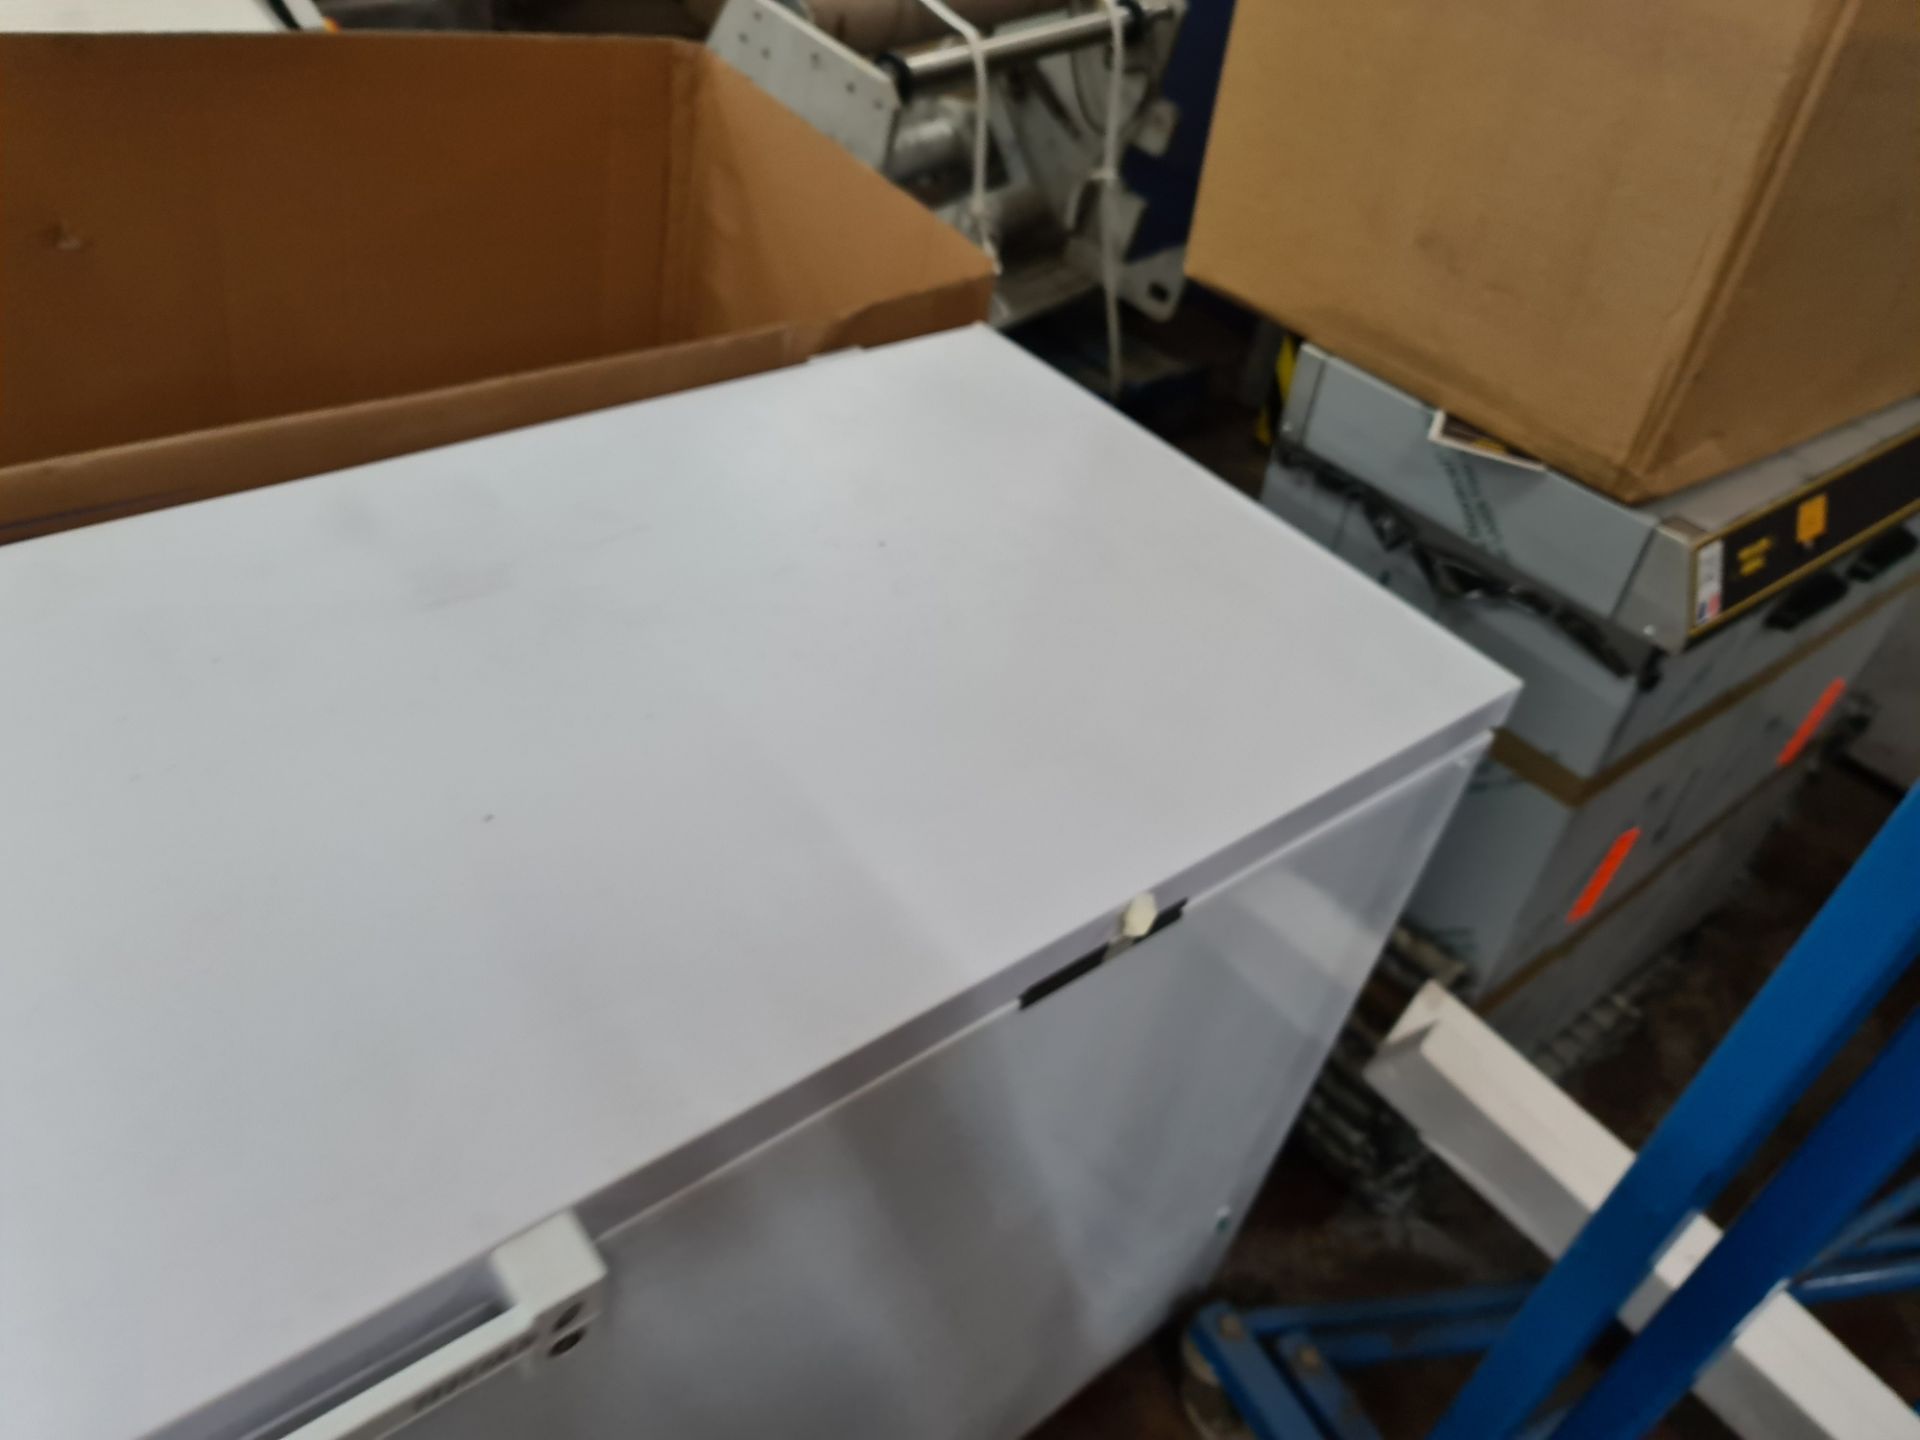 Tefcold 1.8 metre solid top chest freezer, model FR605SL, with 2 keys, appears new/unused. - Image 8 of 9